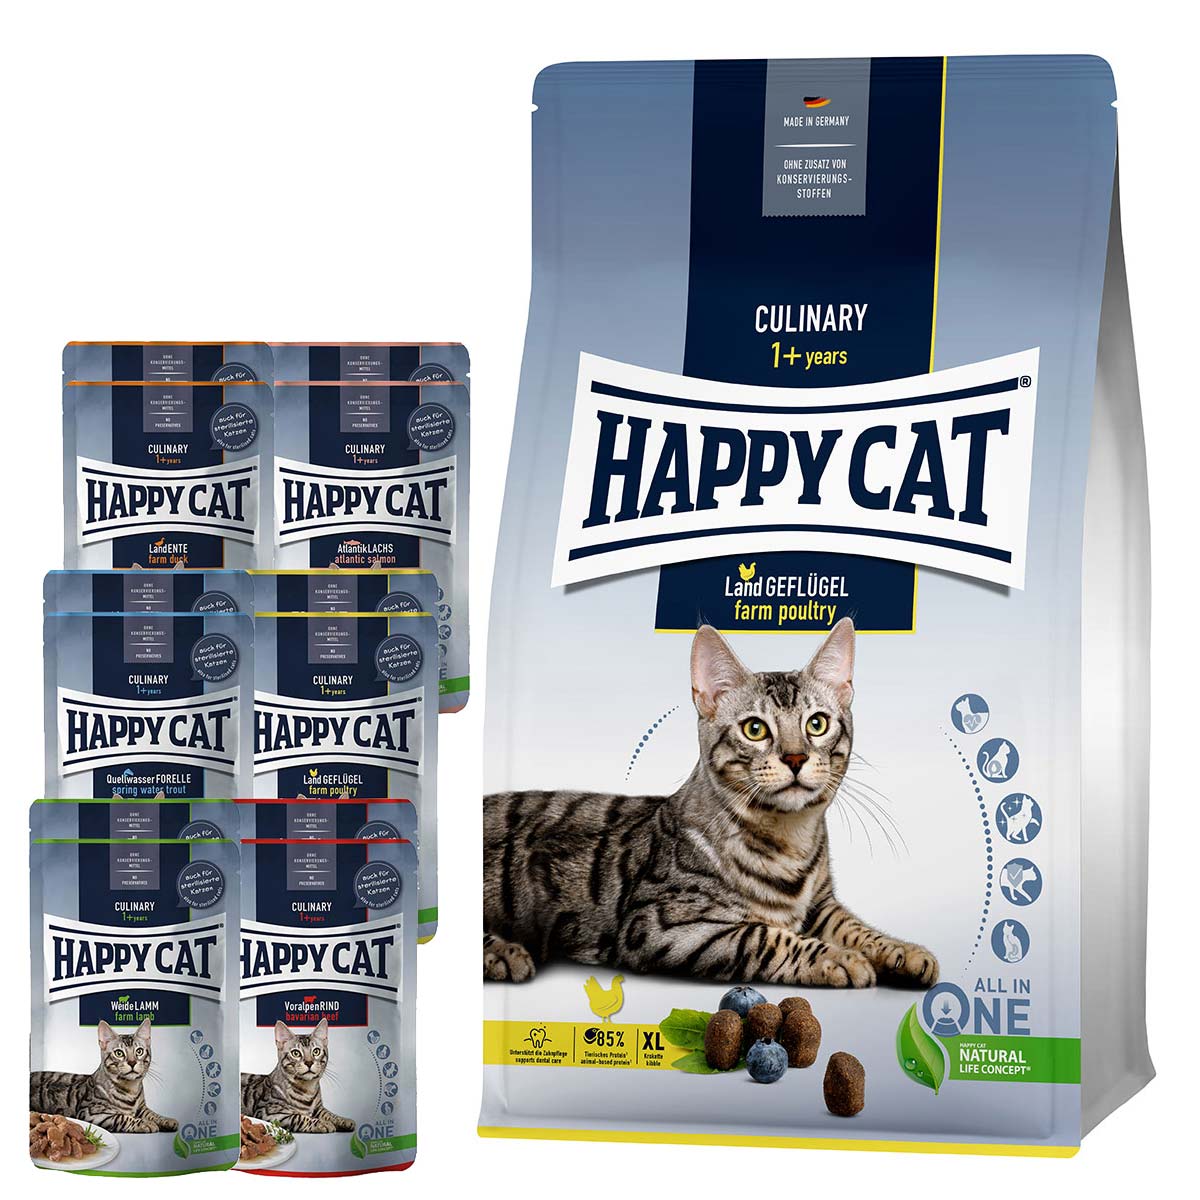 Happy Cat Culinary Adult Land Geflügel 10 kg + Mischtray 1 Happy Cat Pouches 12x85g gratis